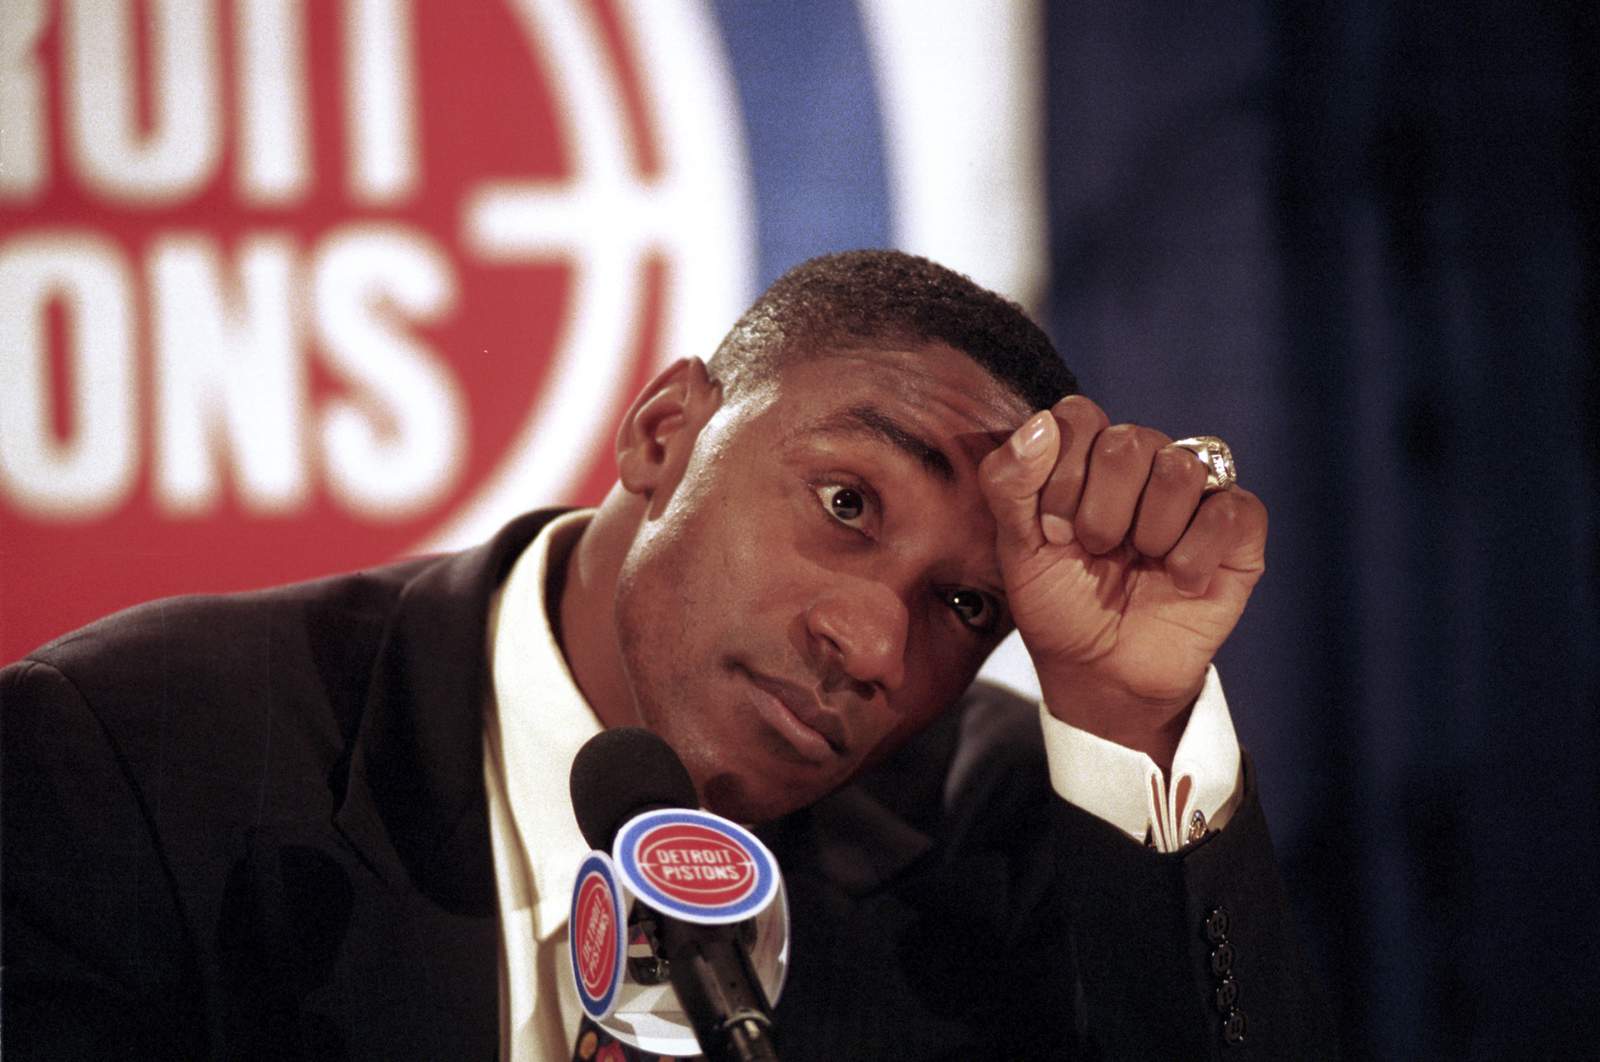 Isiah Thomas' Olympic hopes were denied, not once but twice